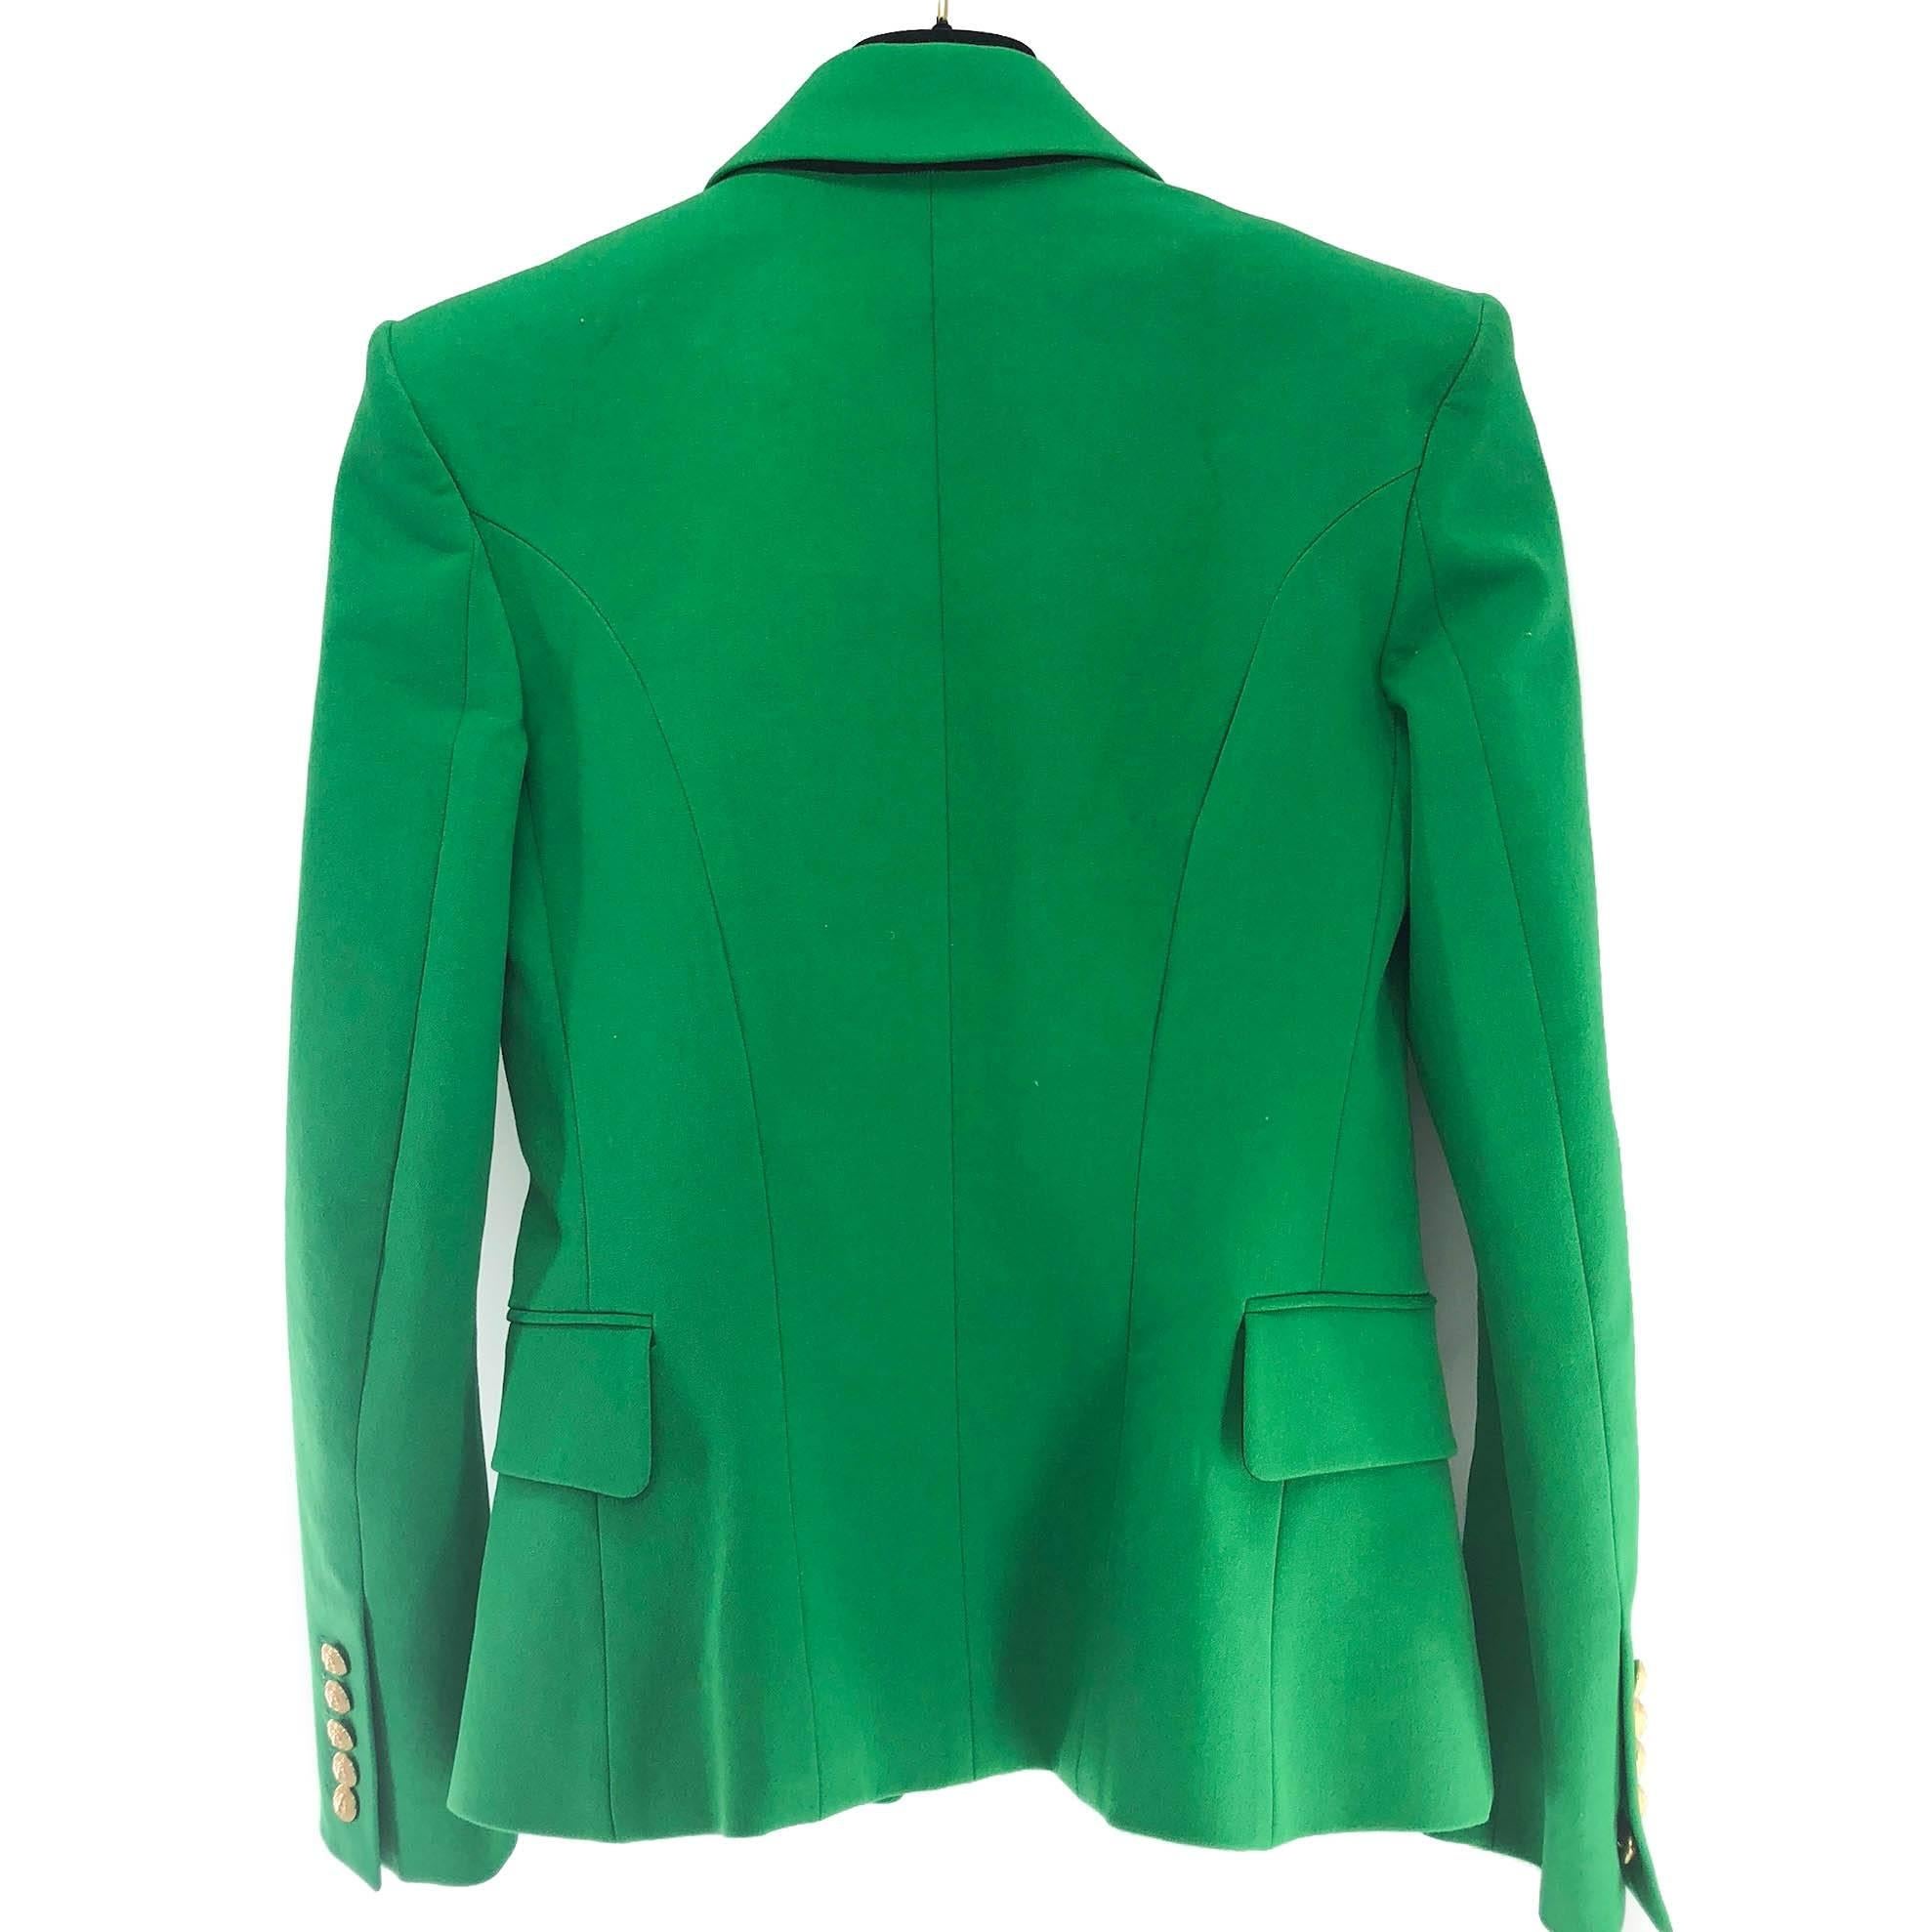 This Emerald Green Balmain Blazer in size 40 with oversized gold buttons is a gorgeous statement piece that transcends the trends. Enjoy this with a skirt, or jeans for a smart casual look.

Condition is Like New, has been altered but never worn.